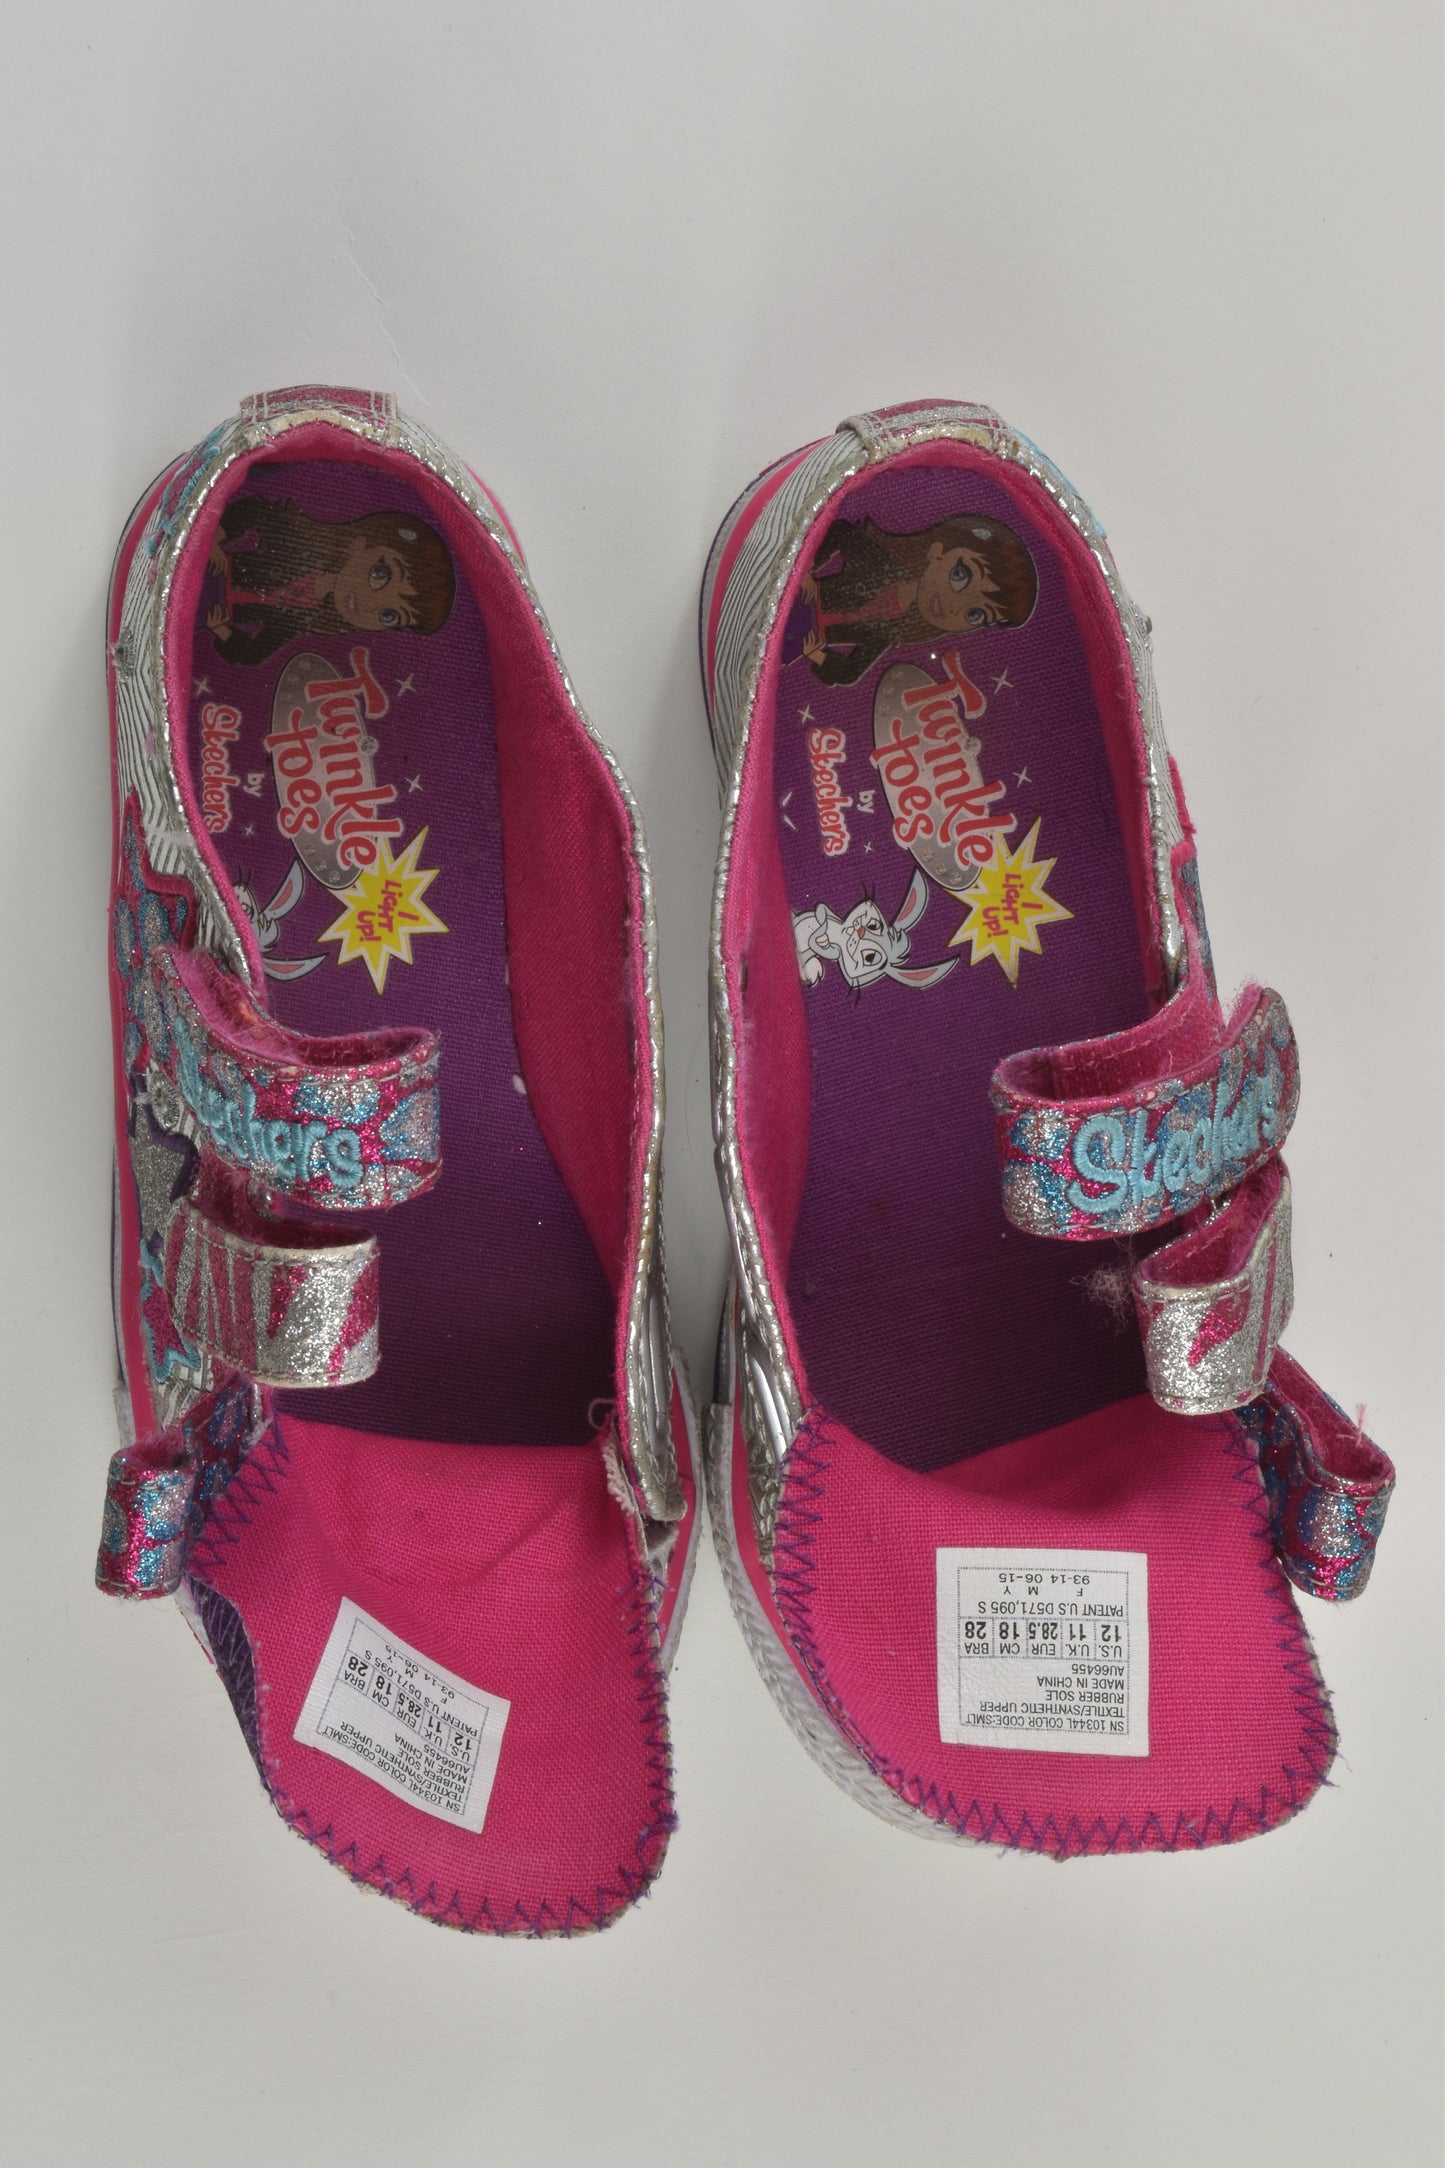 Skechers Size UK 11 Twinkle Toes Shoes